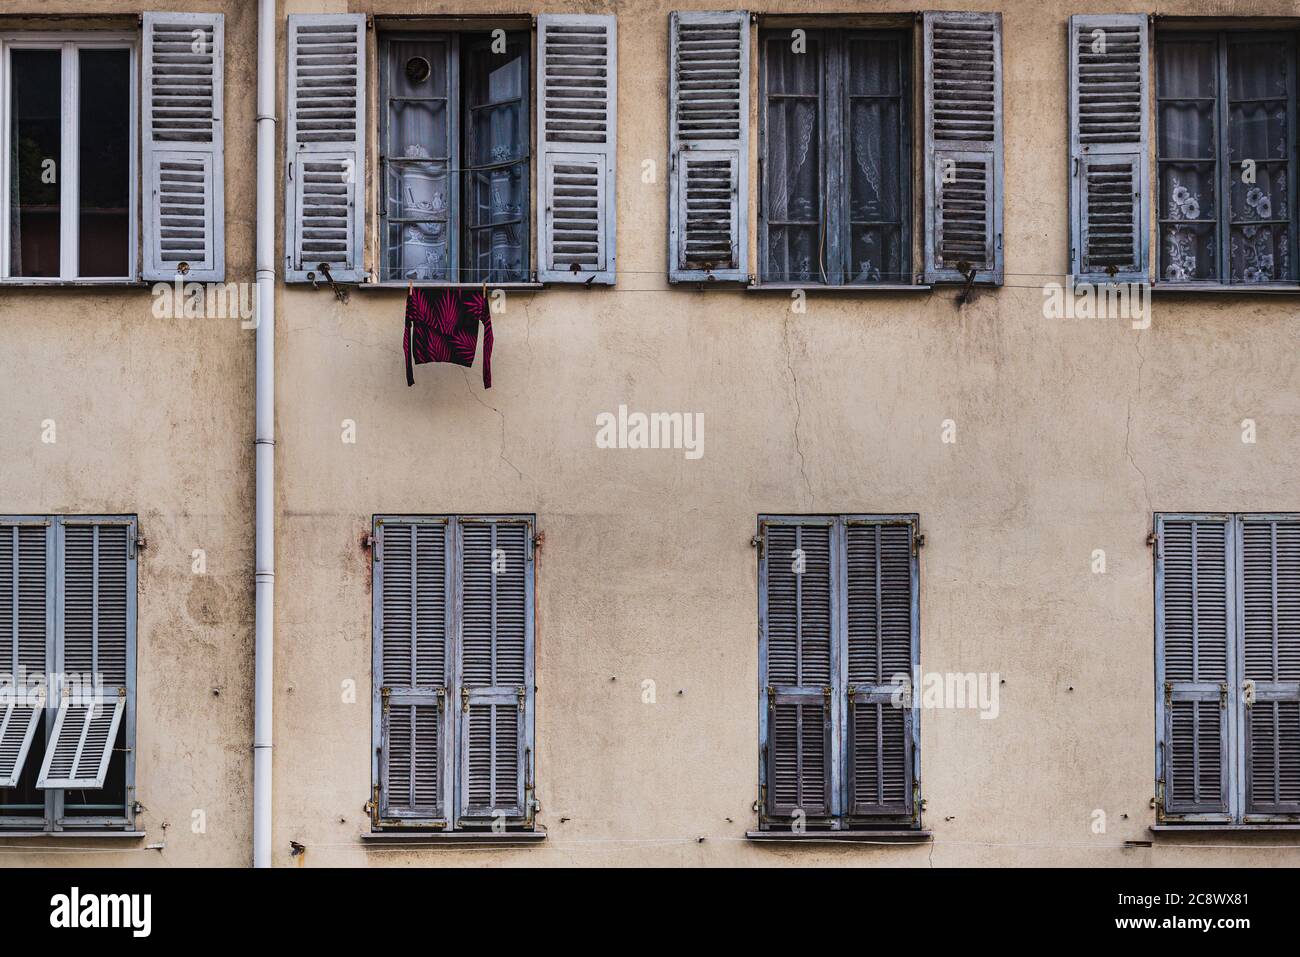 Hanging shirt at a window on a traditional old French facade with rows of windows (jalousie) conveys a downtown lifestyle and neighbourhood privacy Stock Photo